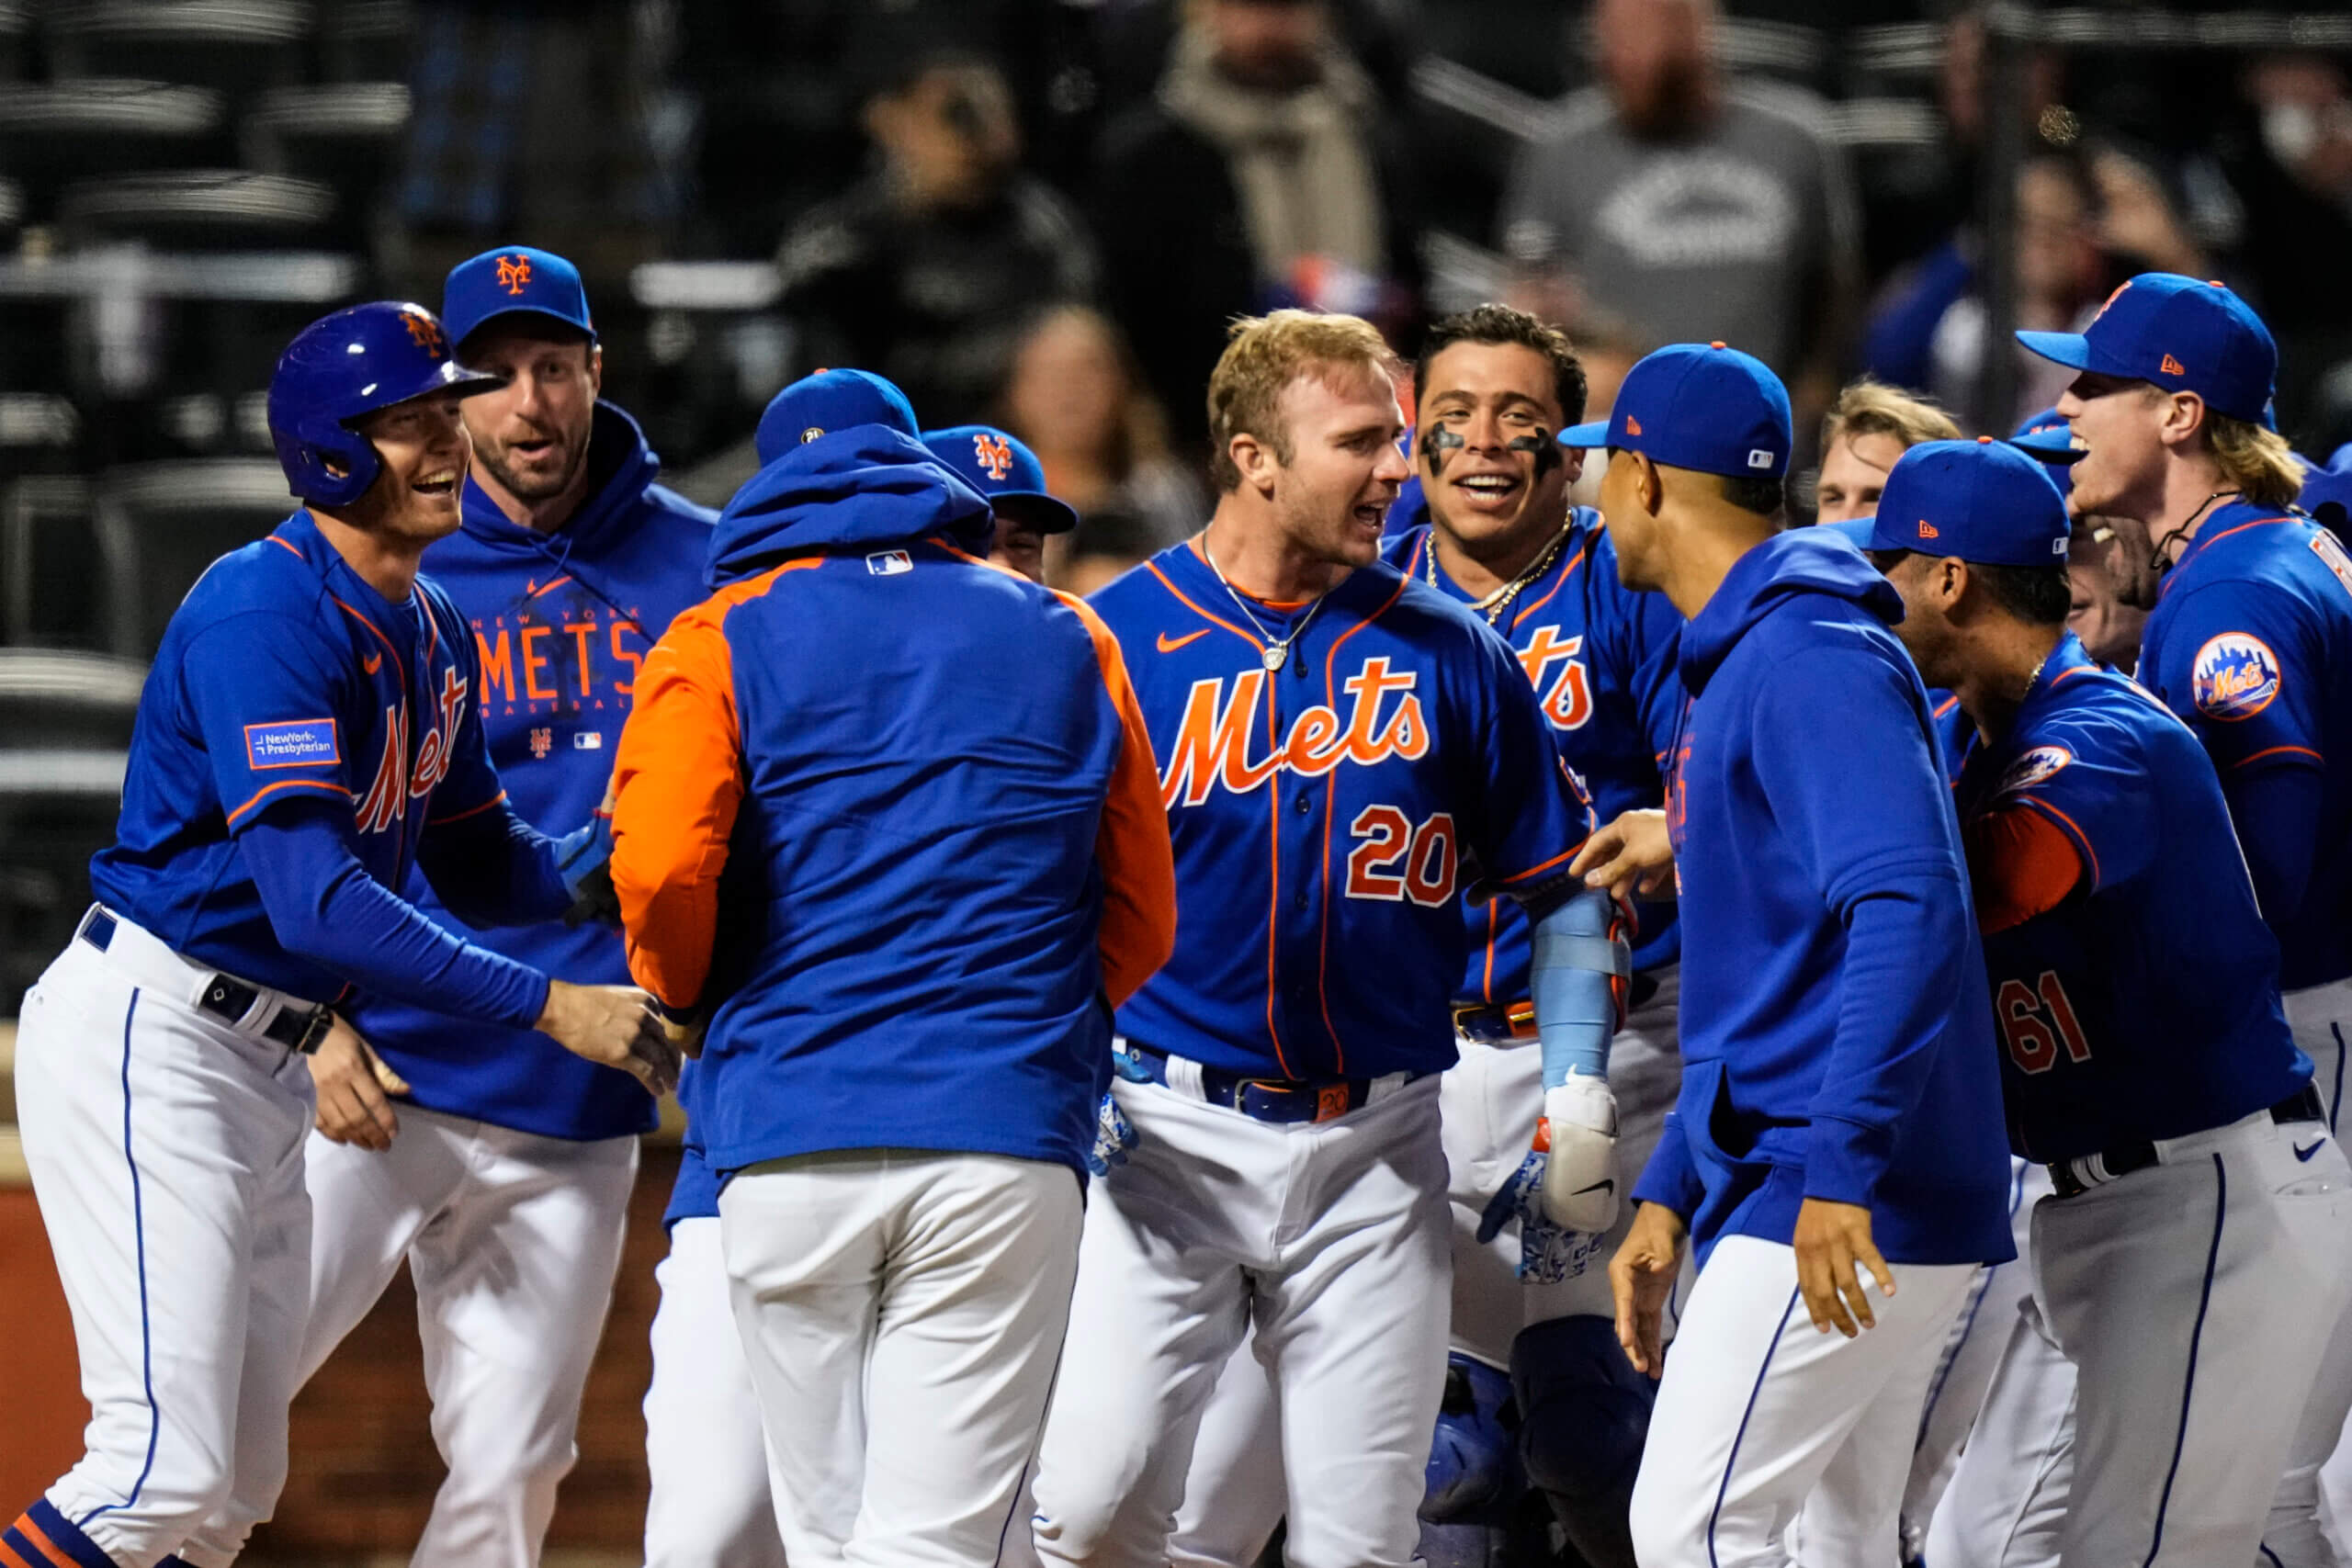 Pete Alonso shrugs off illness, supplies Mets with much-needed antidote of  walk-off win over Rays